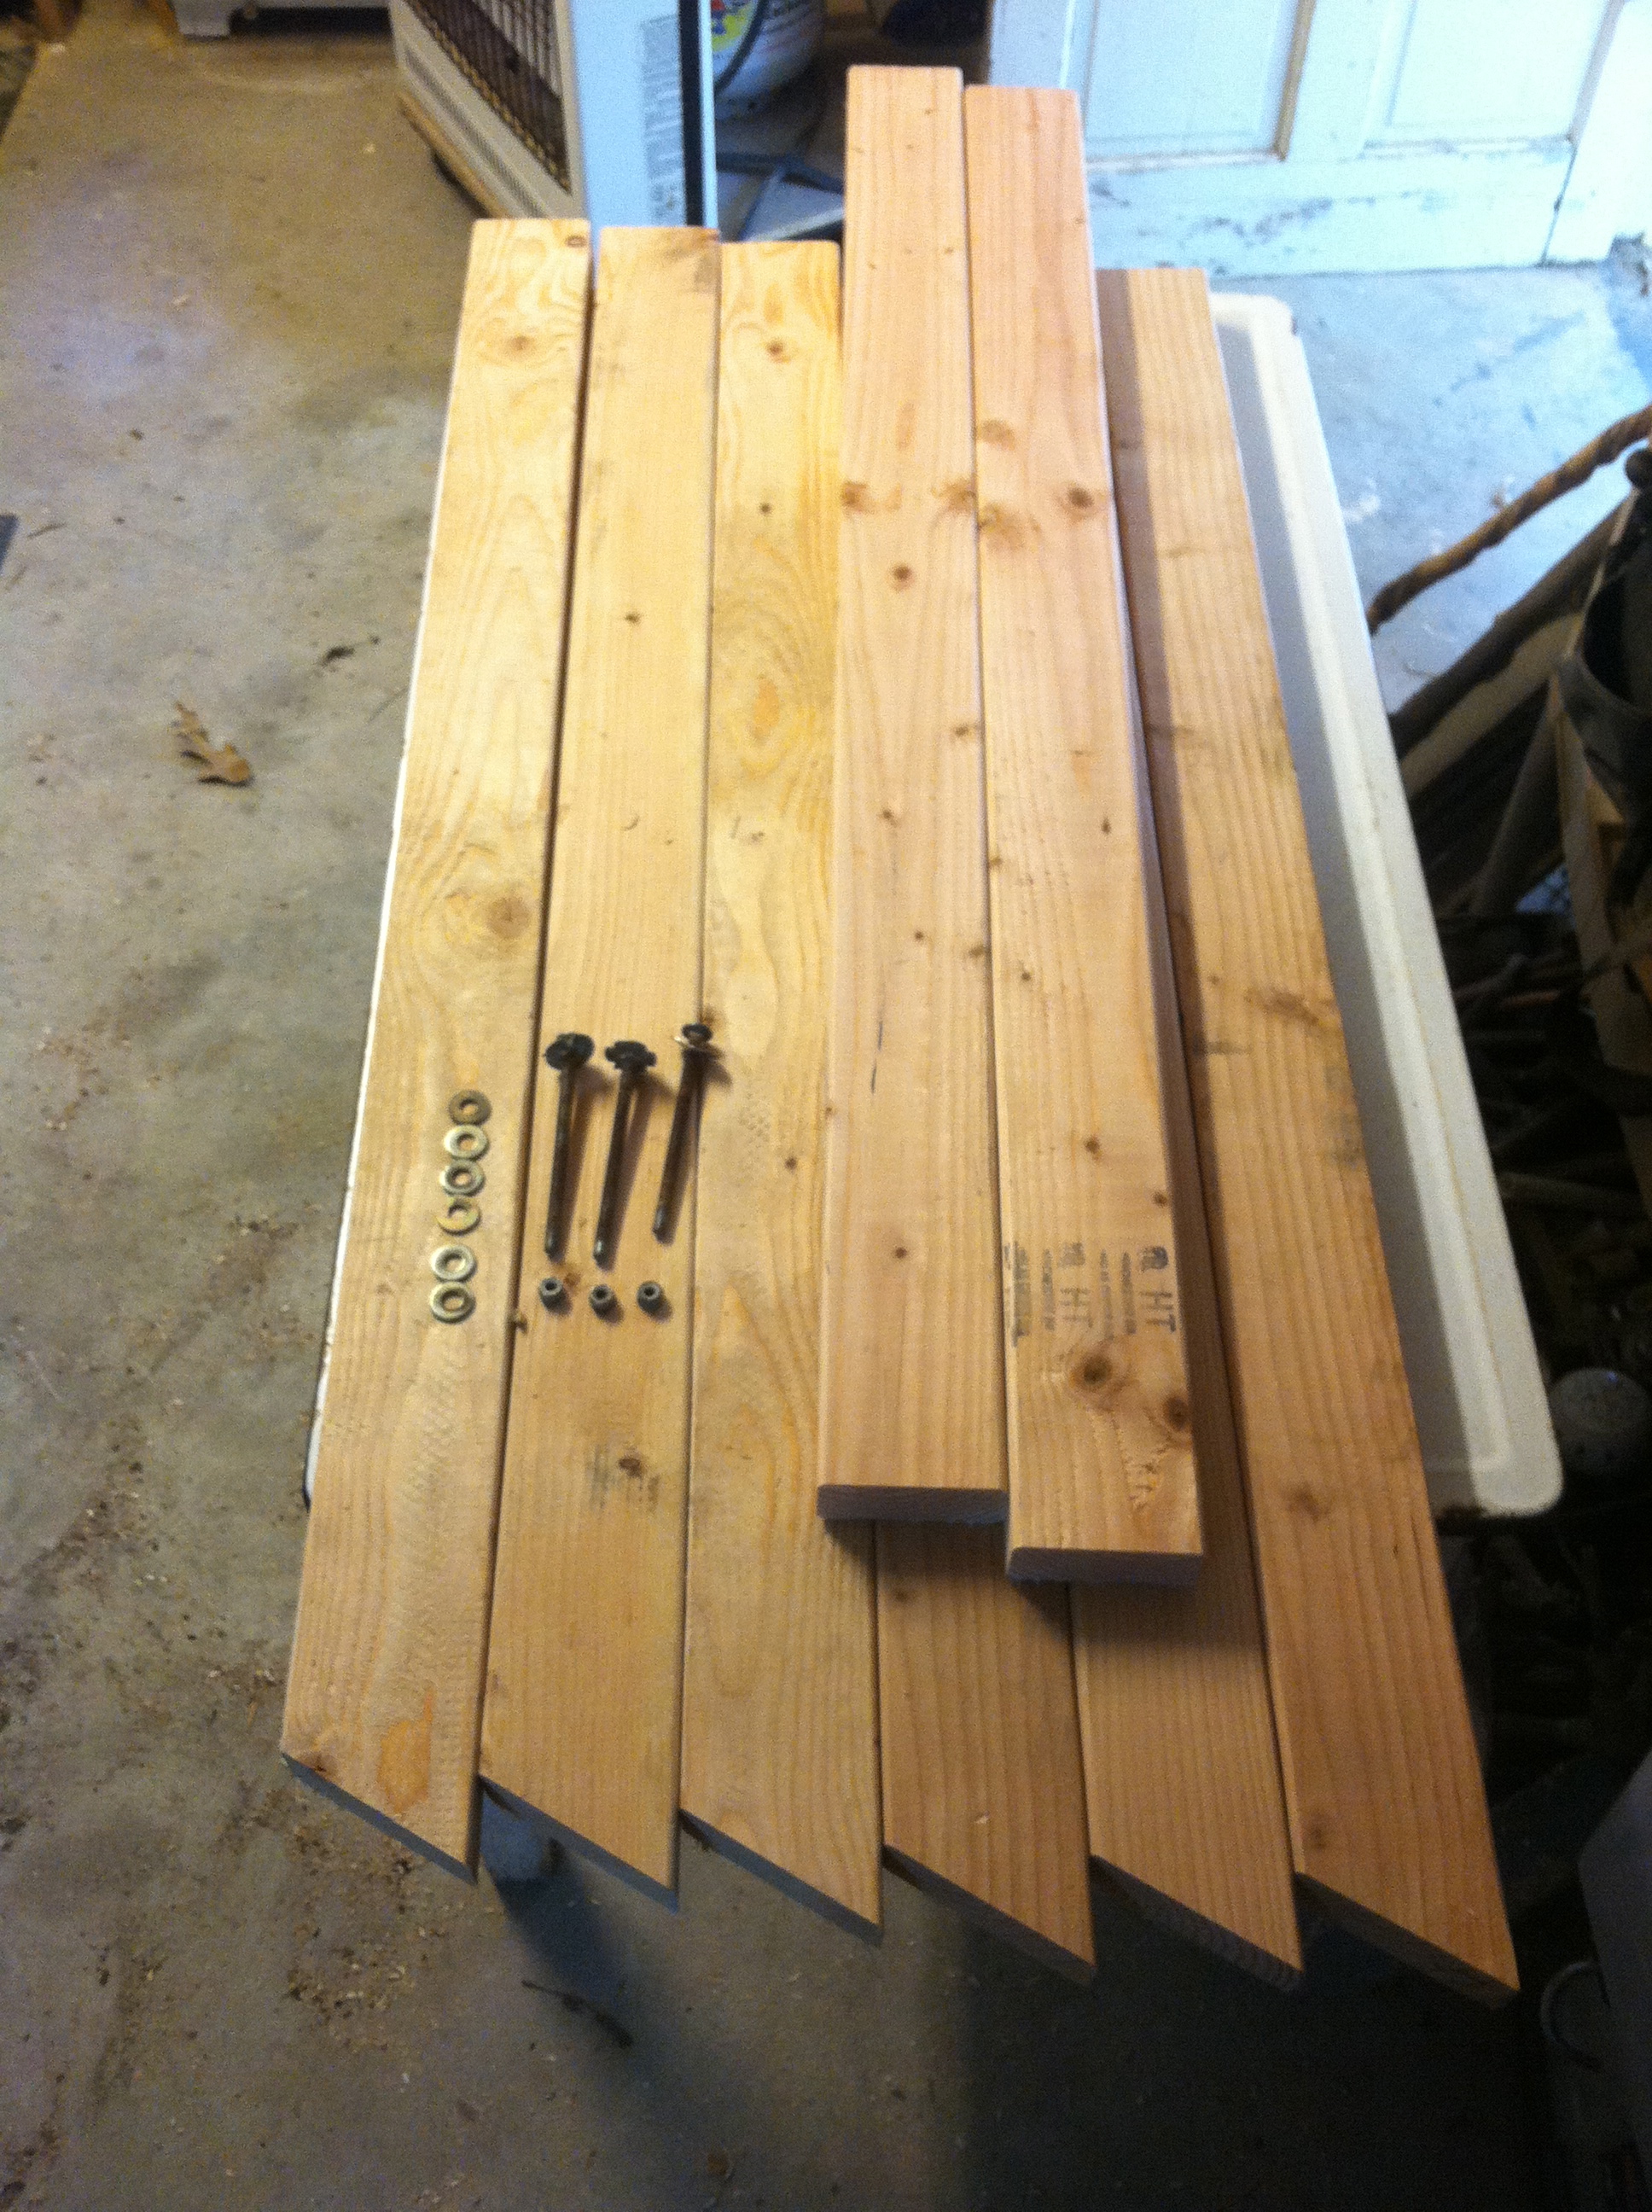 Log sawhorse plans free Plans DIY How to Make | overrated05wks